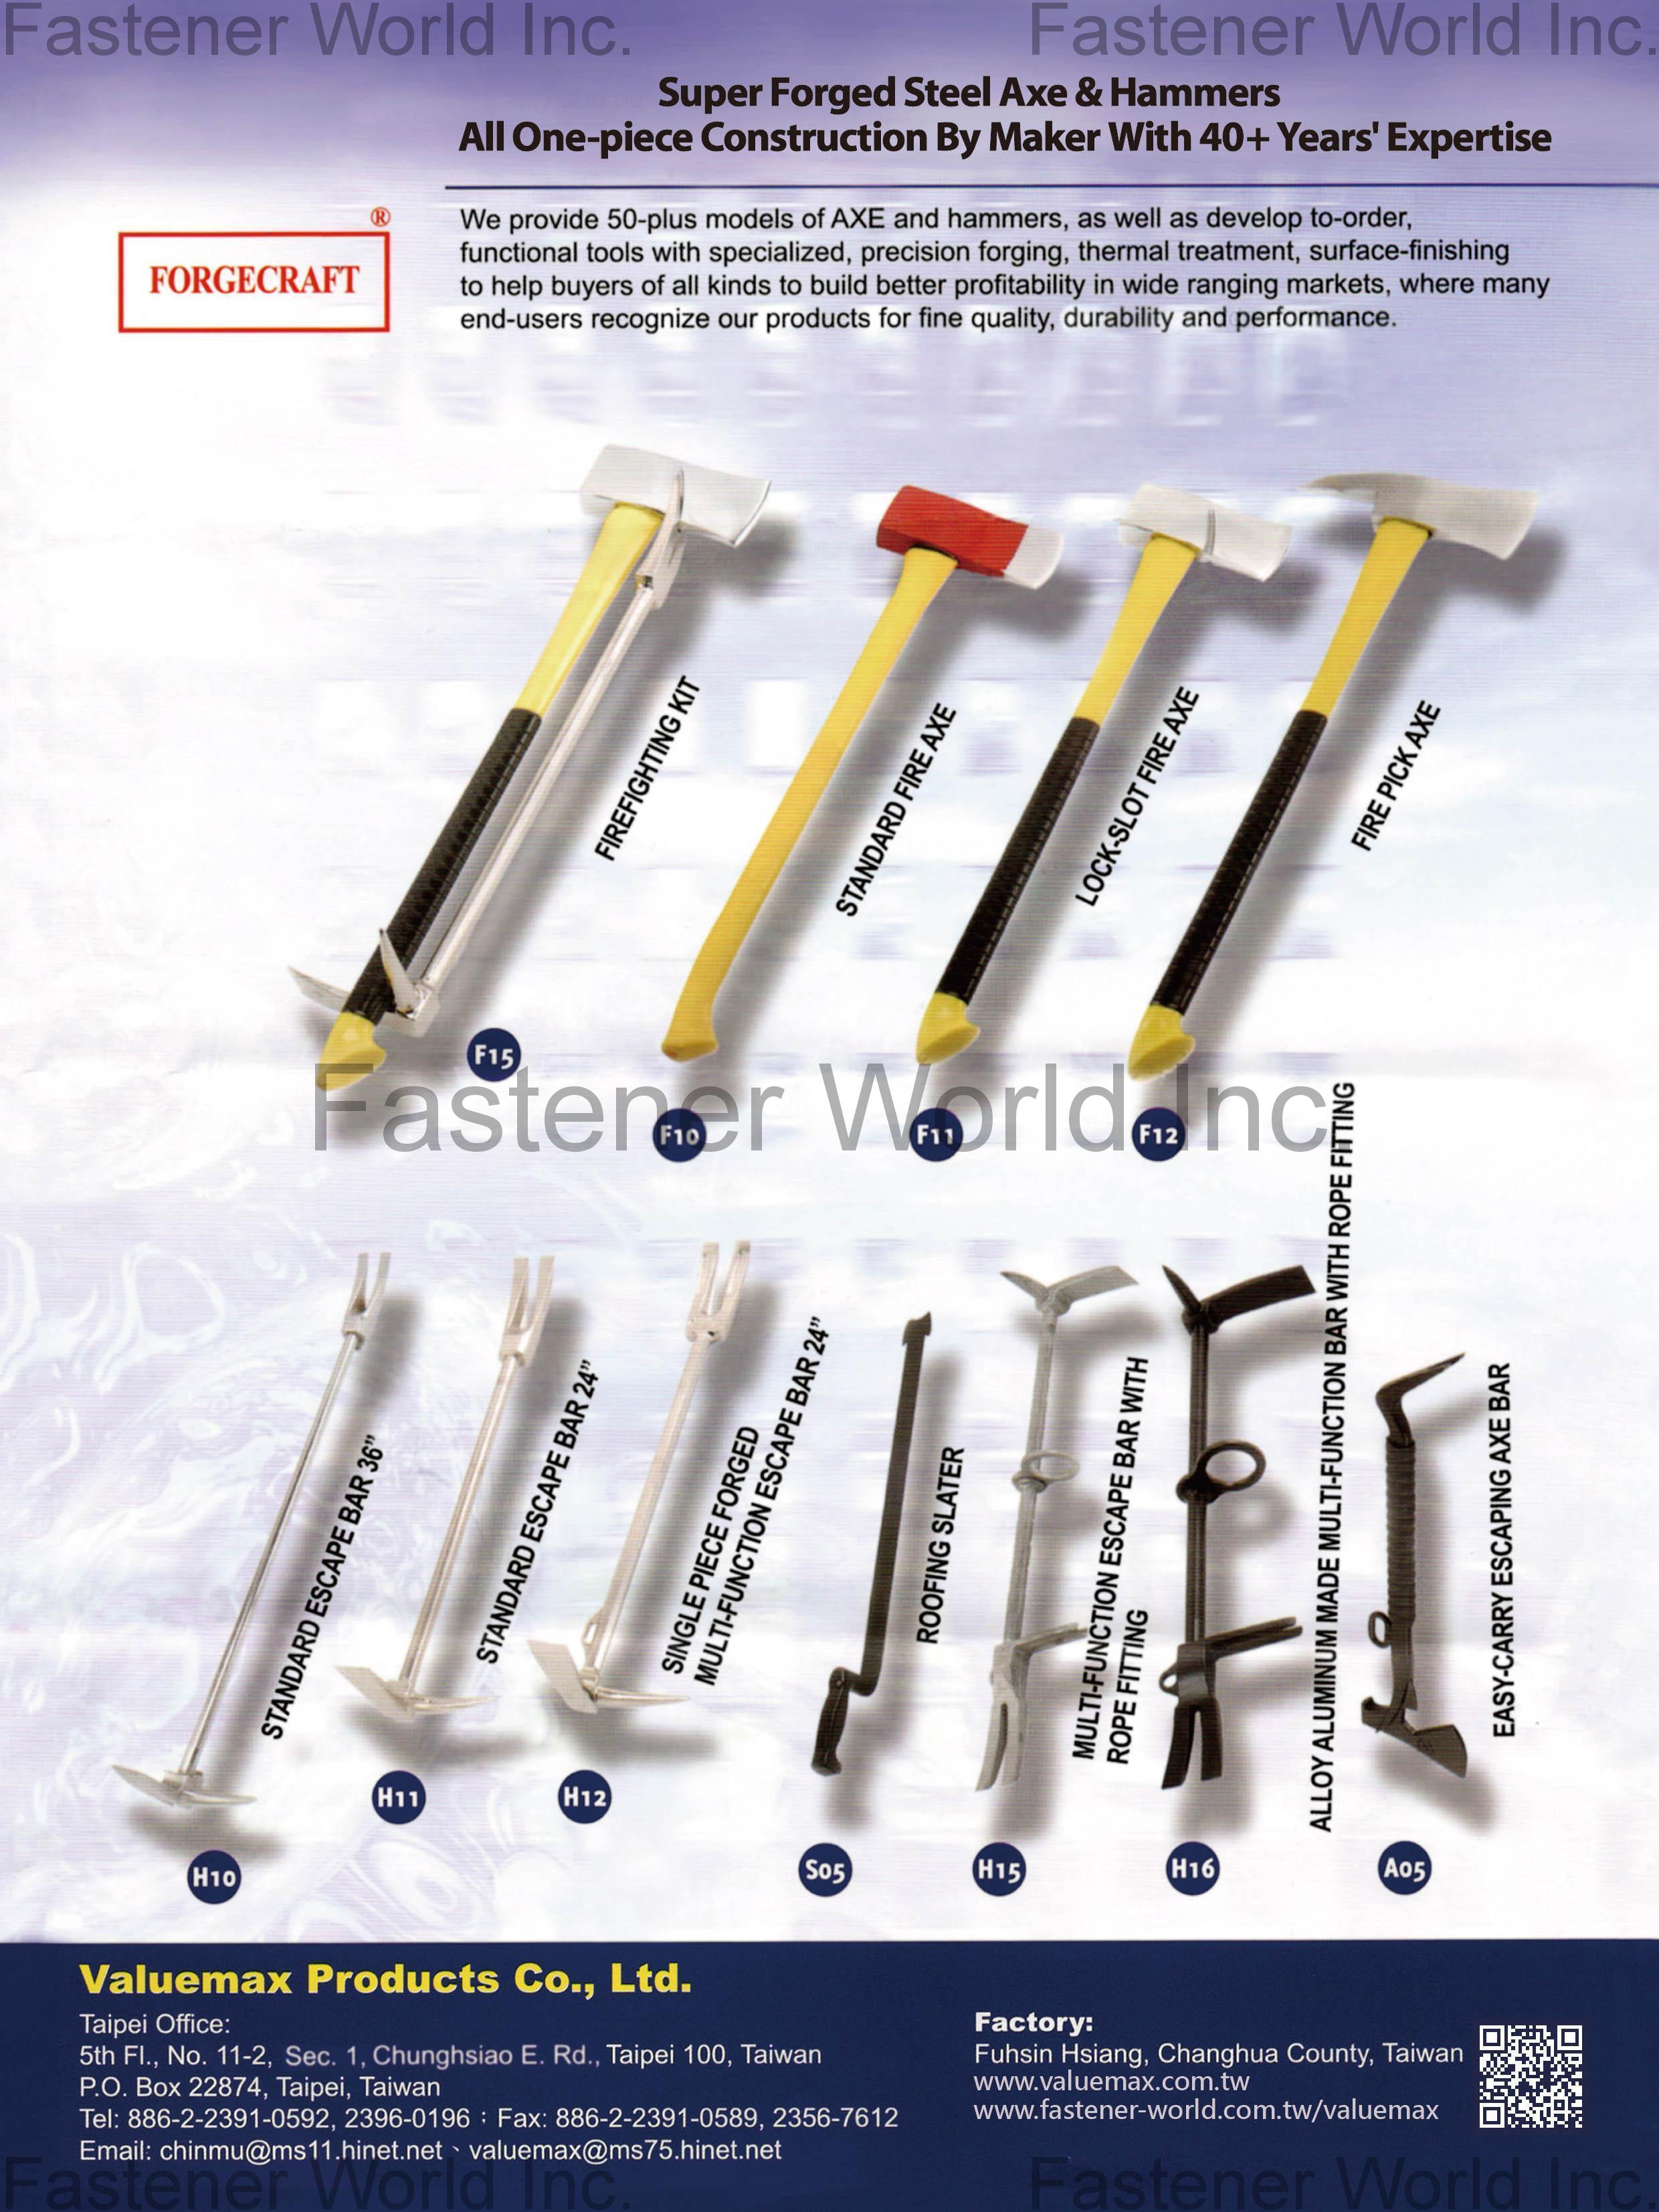 VALUEMAX PRODUCTS, CO., LTD. (CHINA MU IRON) , Steel Axe & Hammers , Hammers